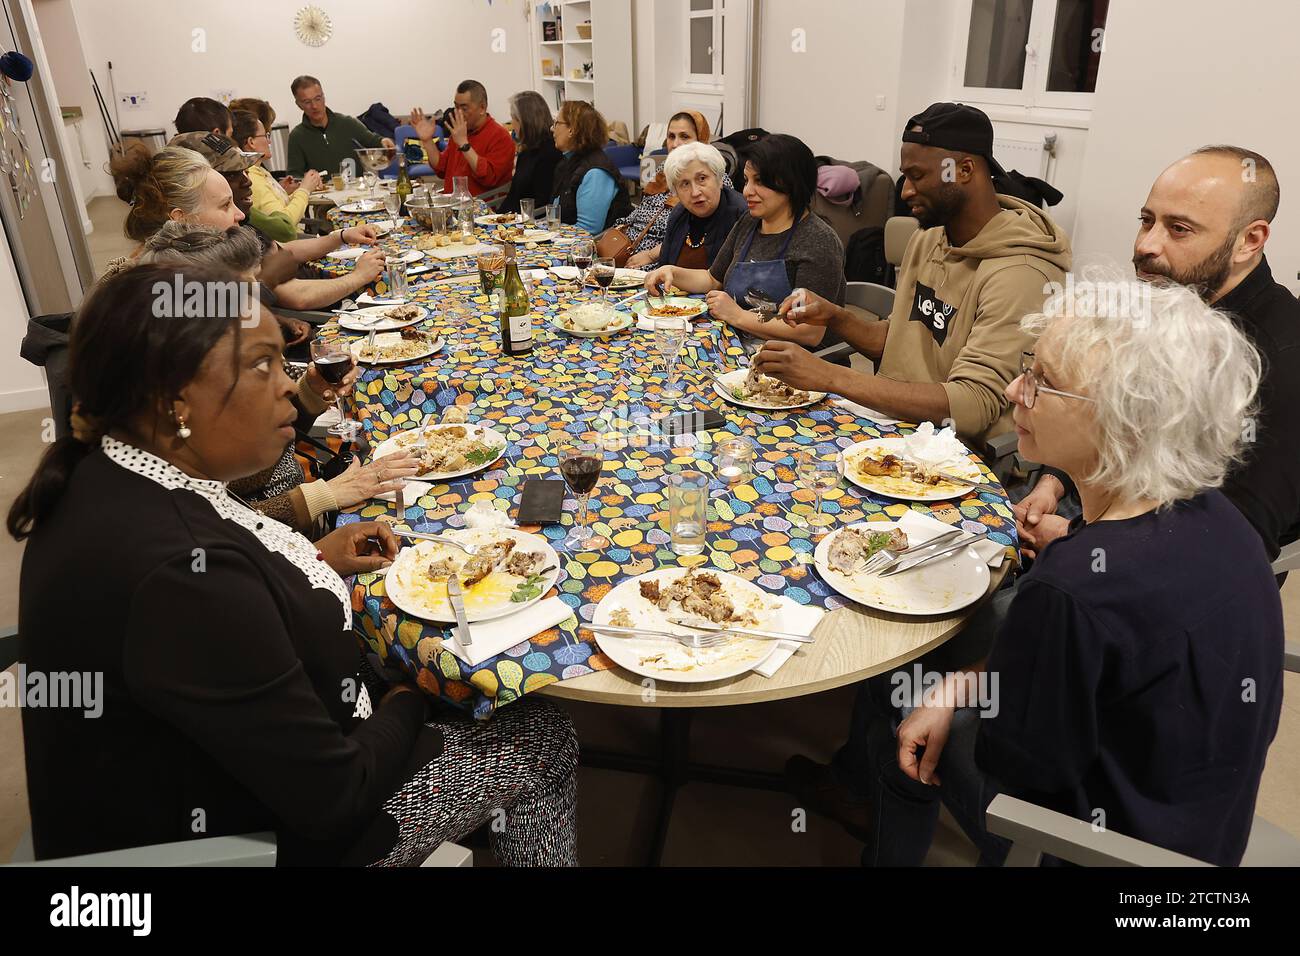 Dinner at la maison Bakhita, a center for migrants run by the Paris catholic diocese, France Stock Photo